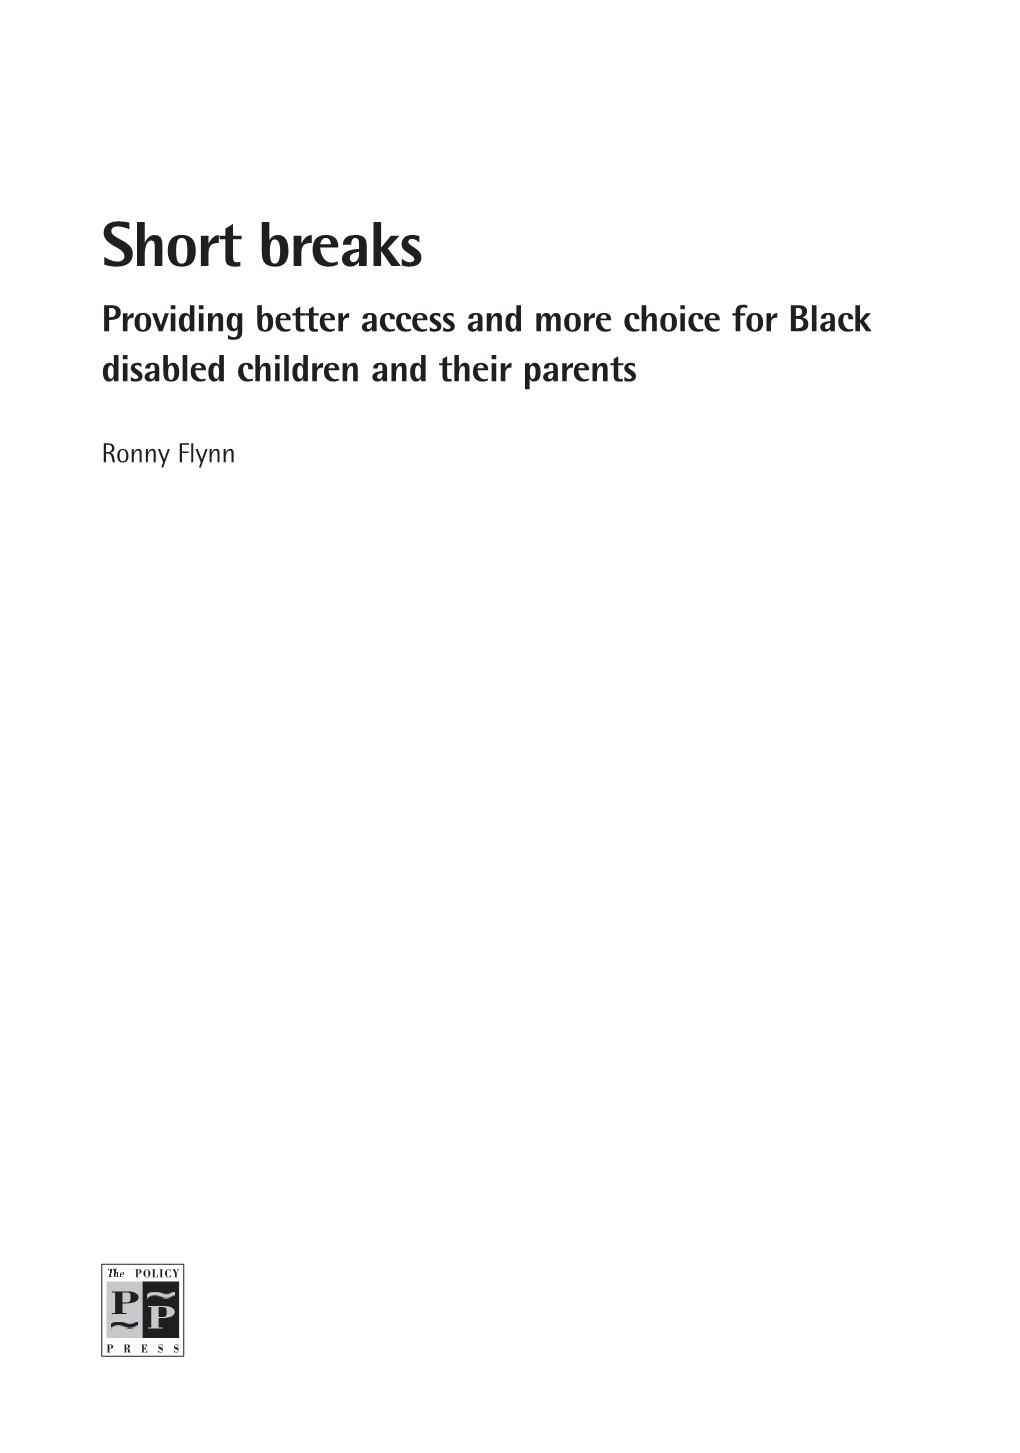 Short Breaks: Providing Better Access and More Choice for Black Disabled